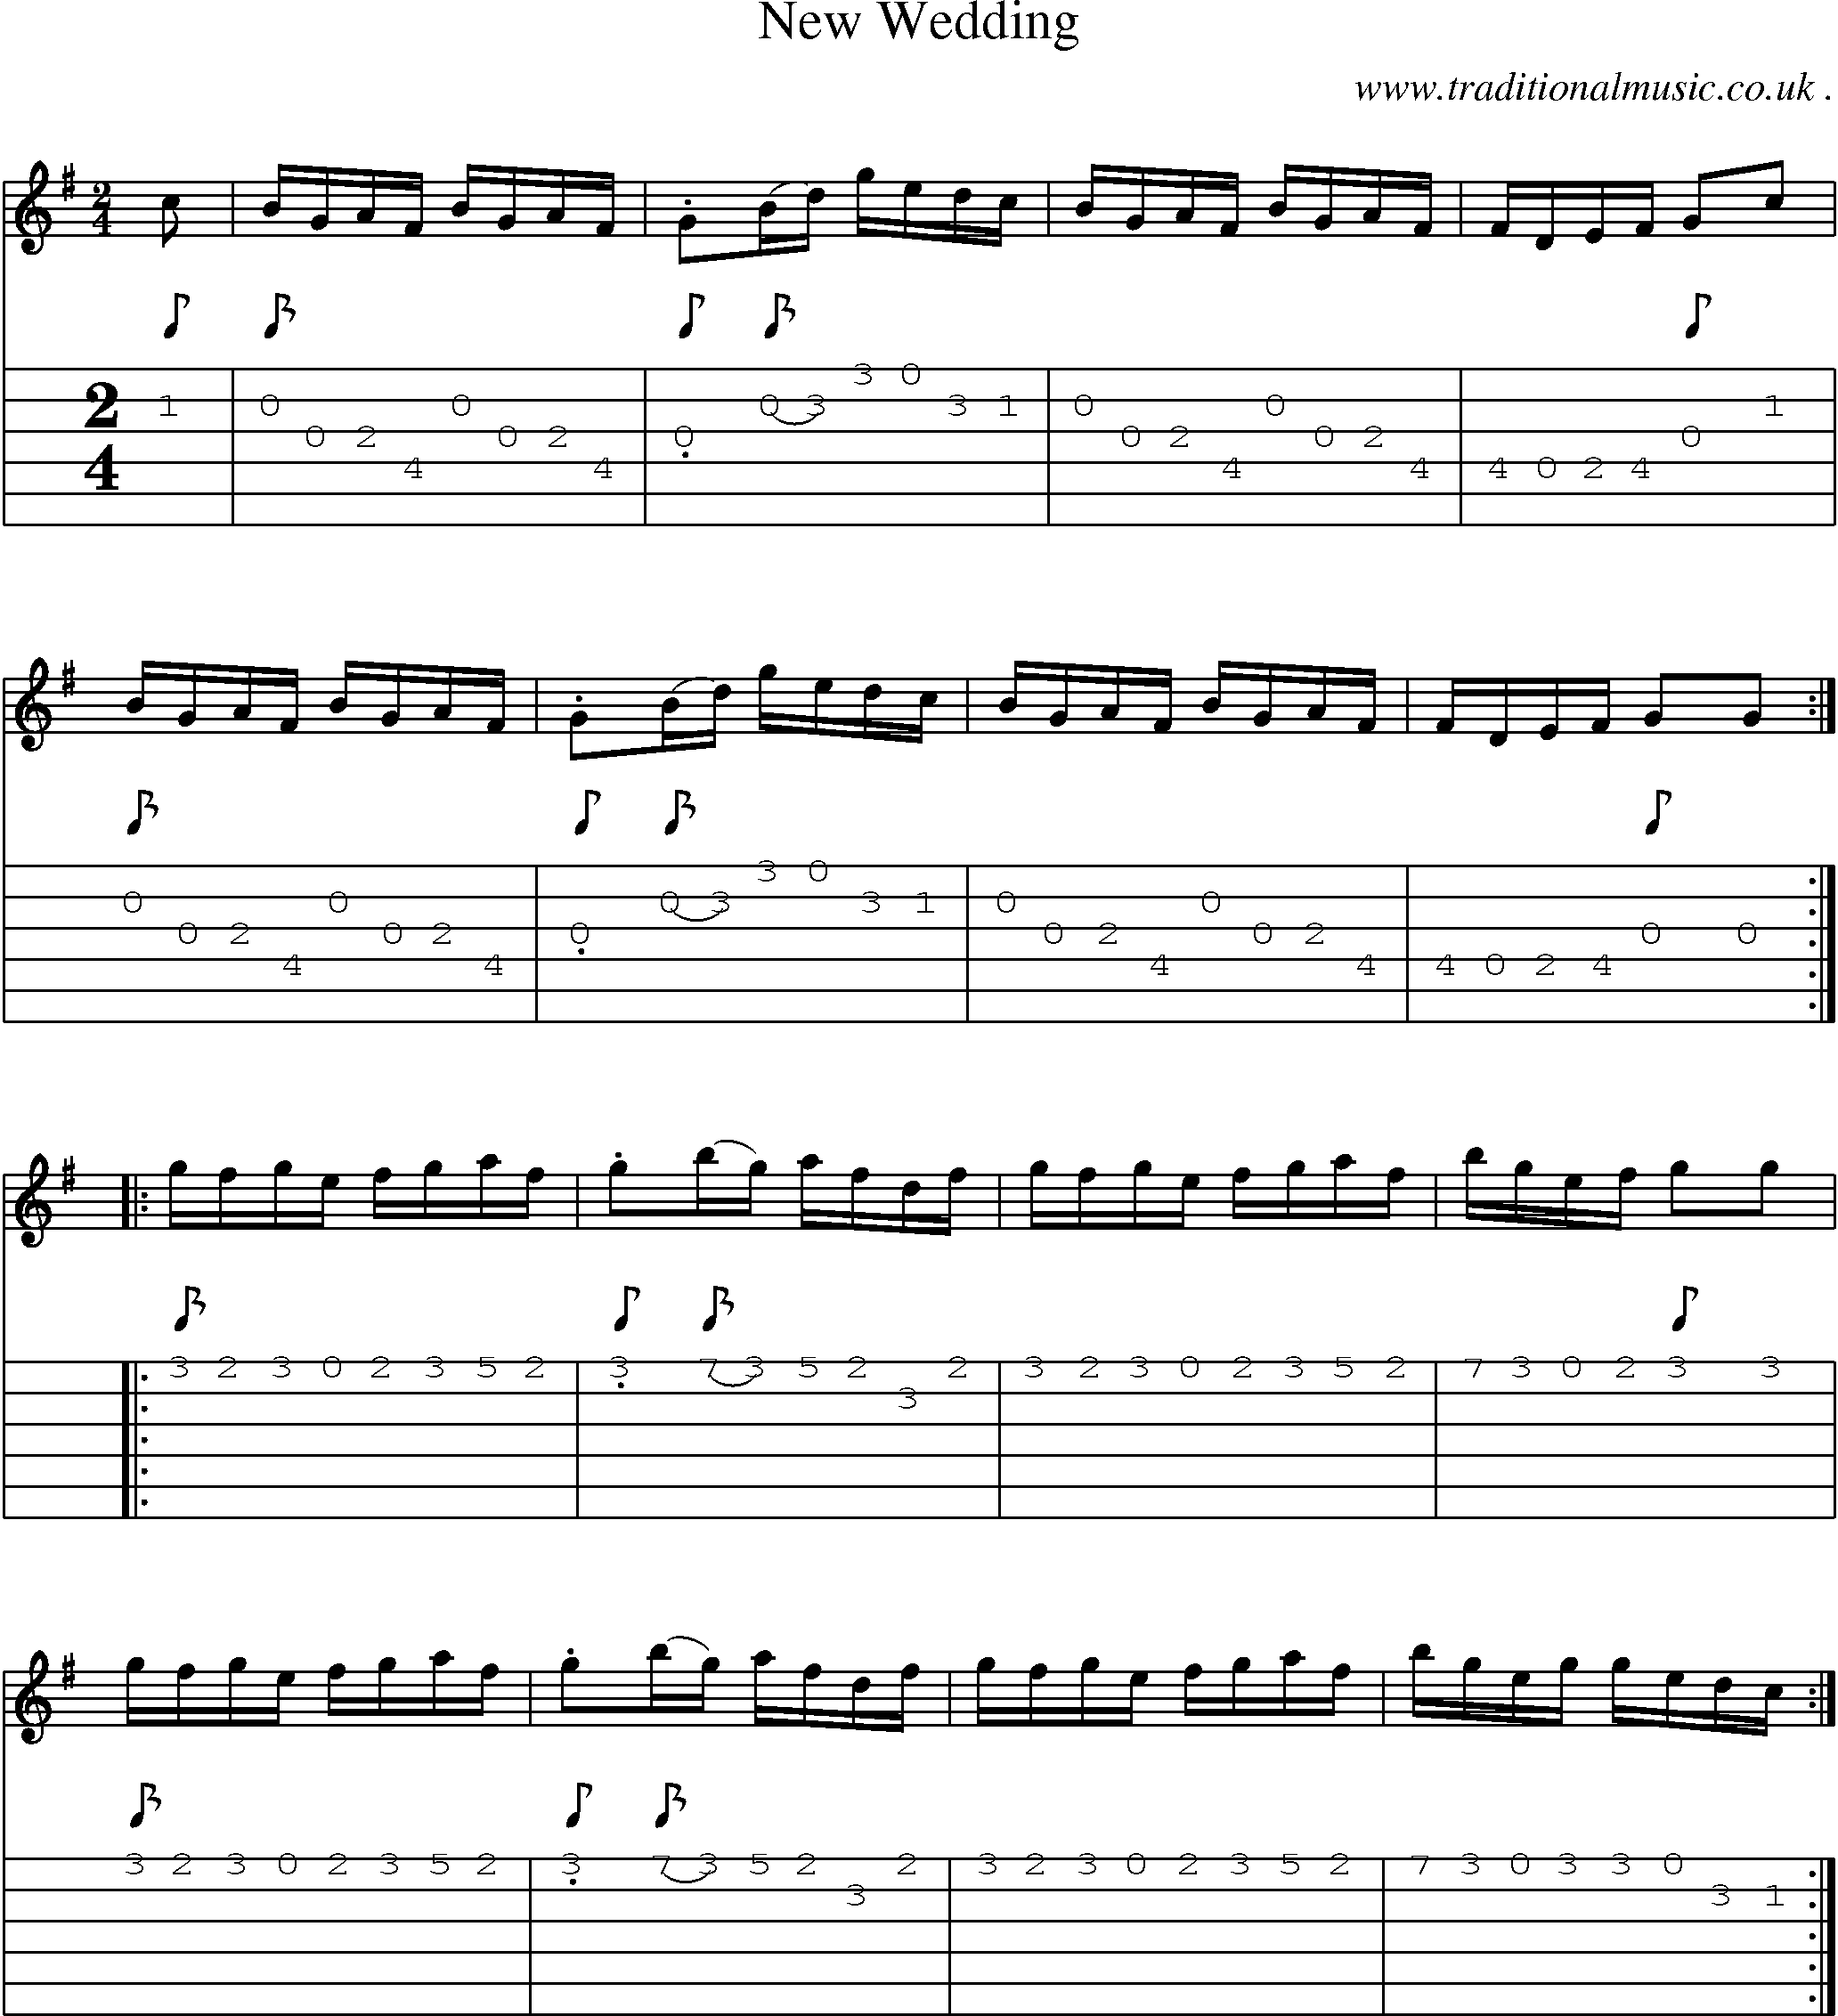 Sheet-Music and Guitar Tabs for New Wedding